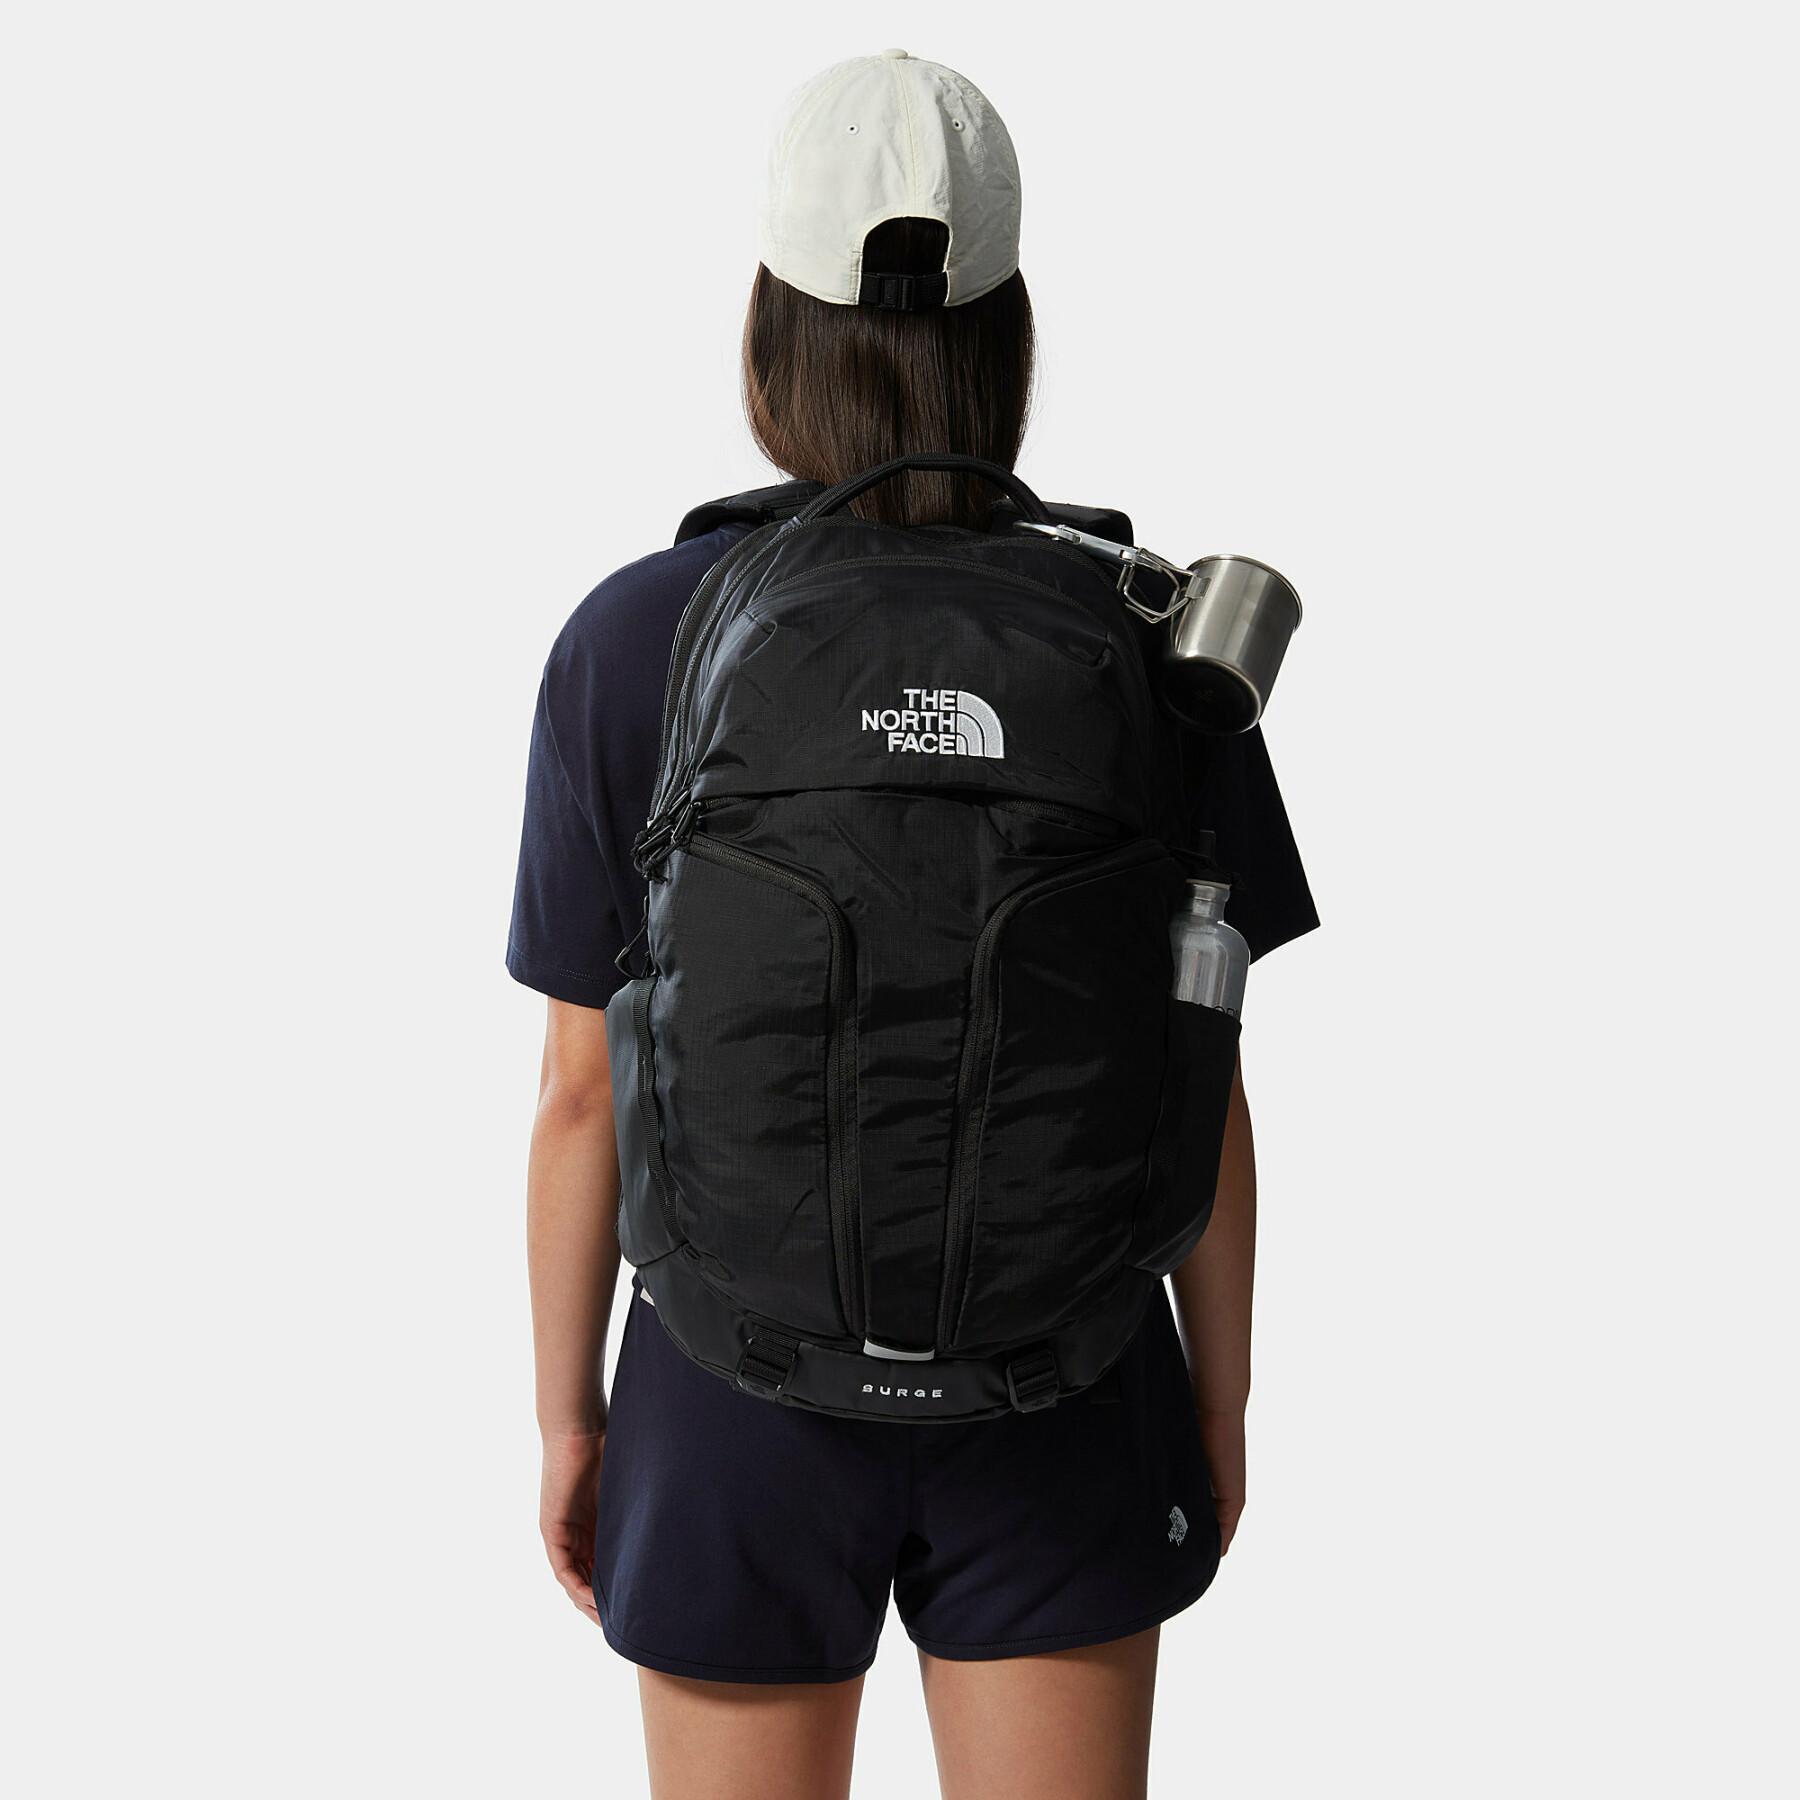 Backpack The North Face Surge